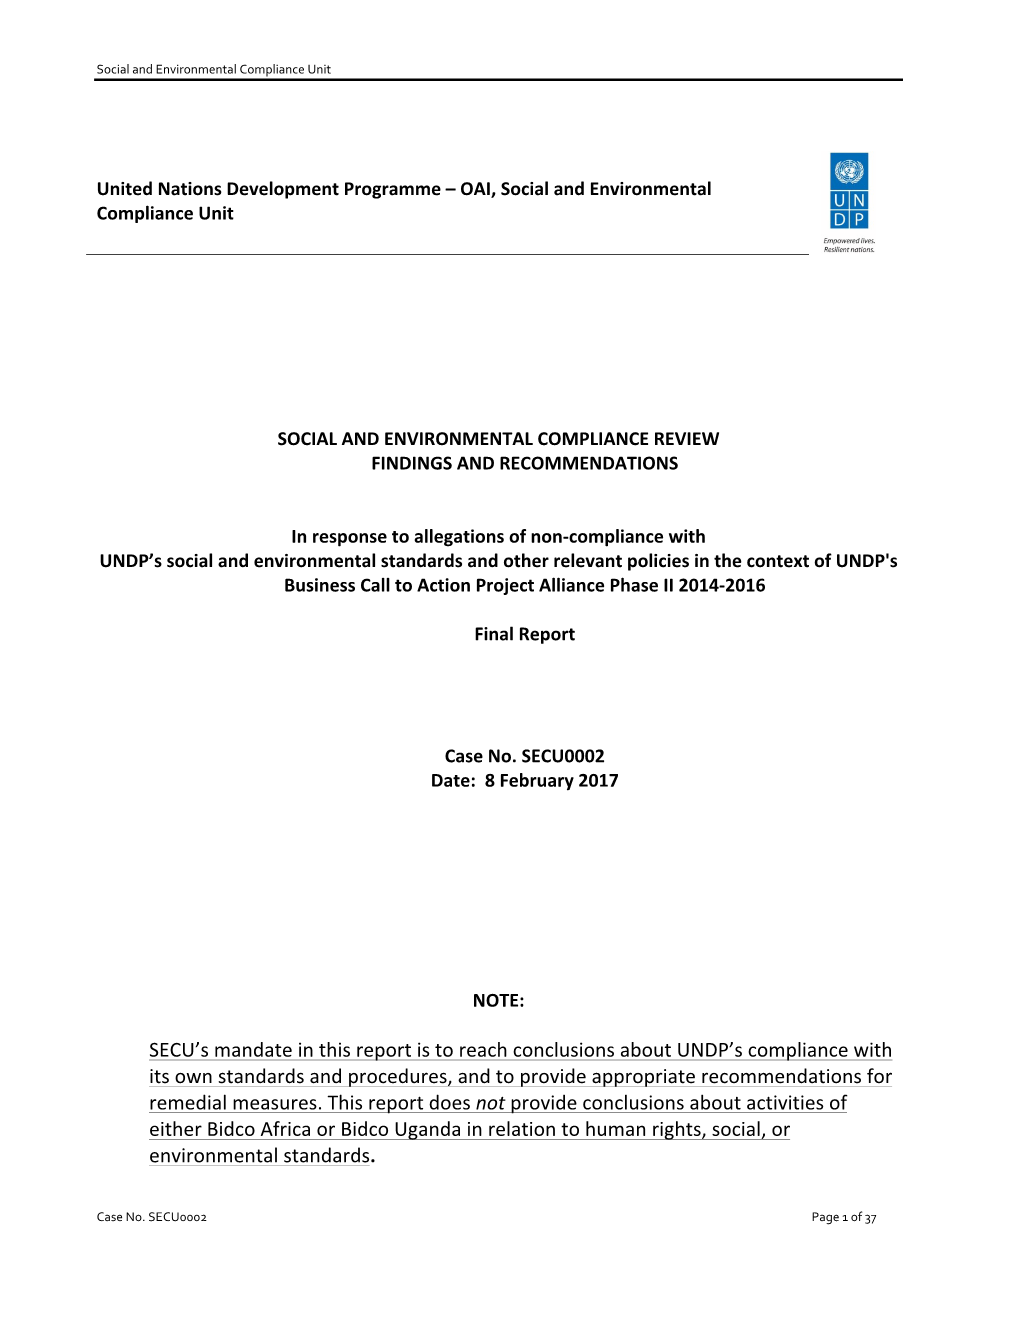 SECU's Mandate in This Report Is to Reach Conclusions About UNDP's